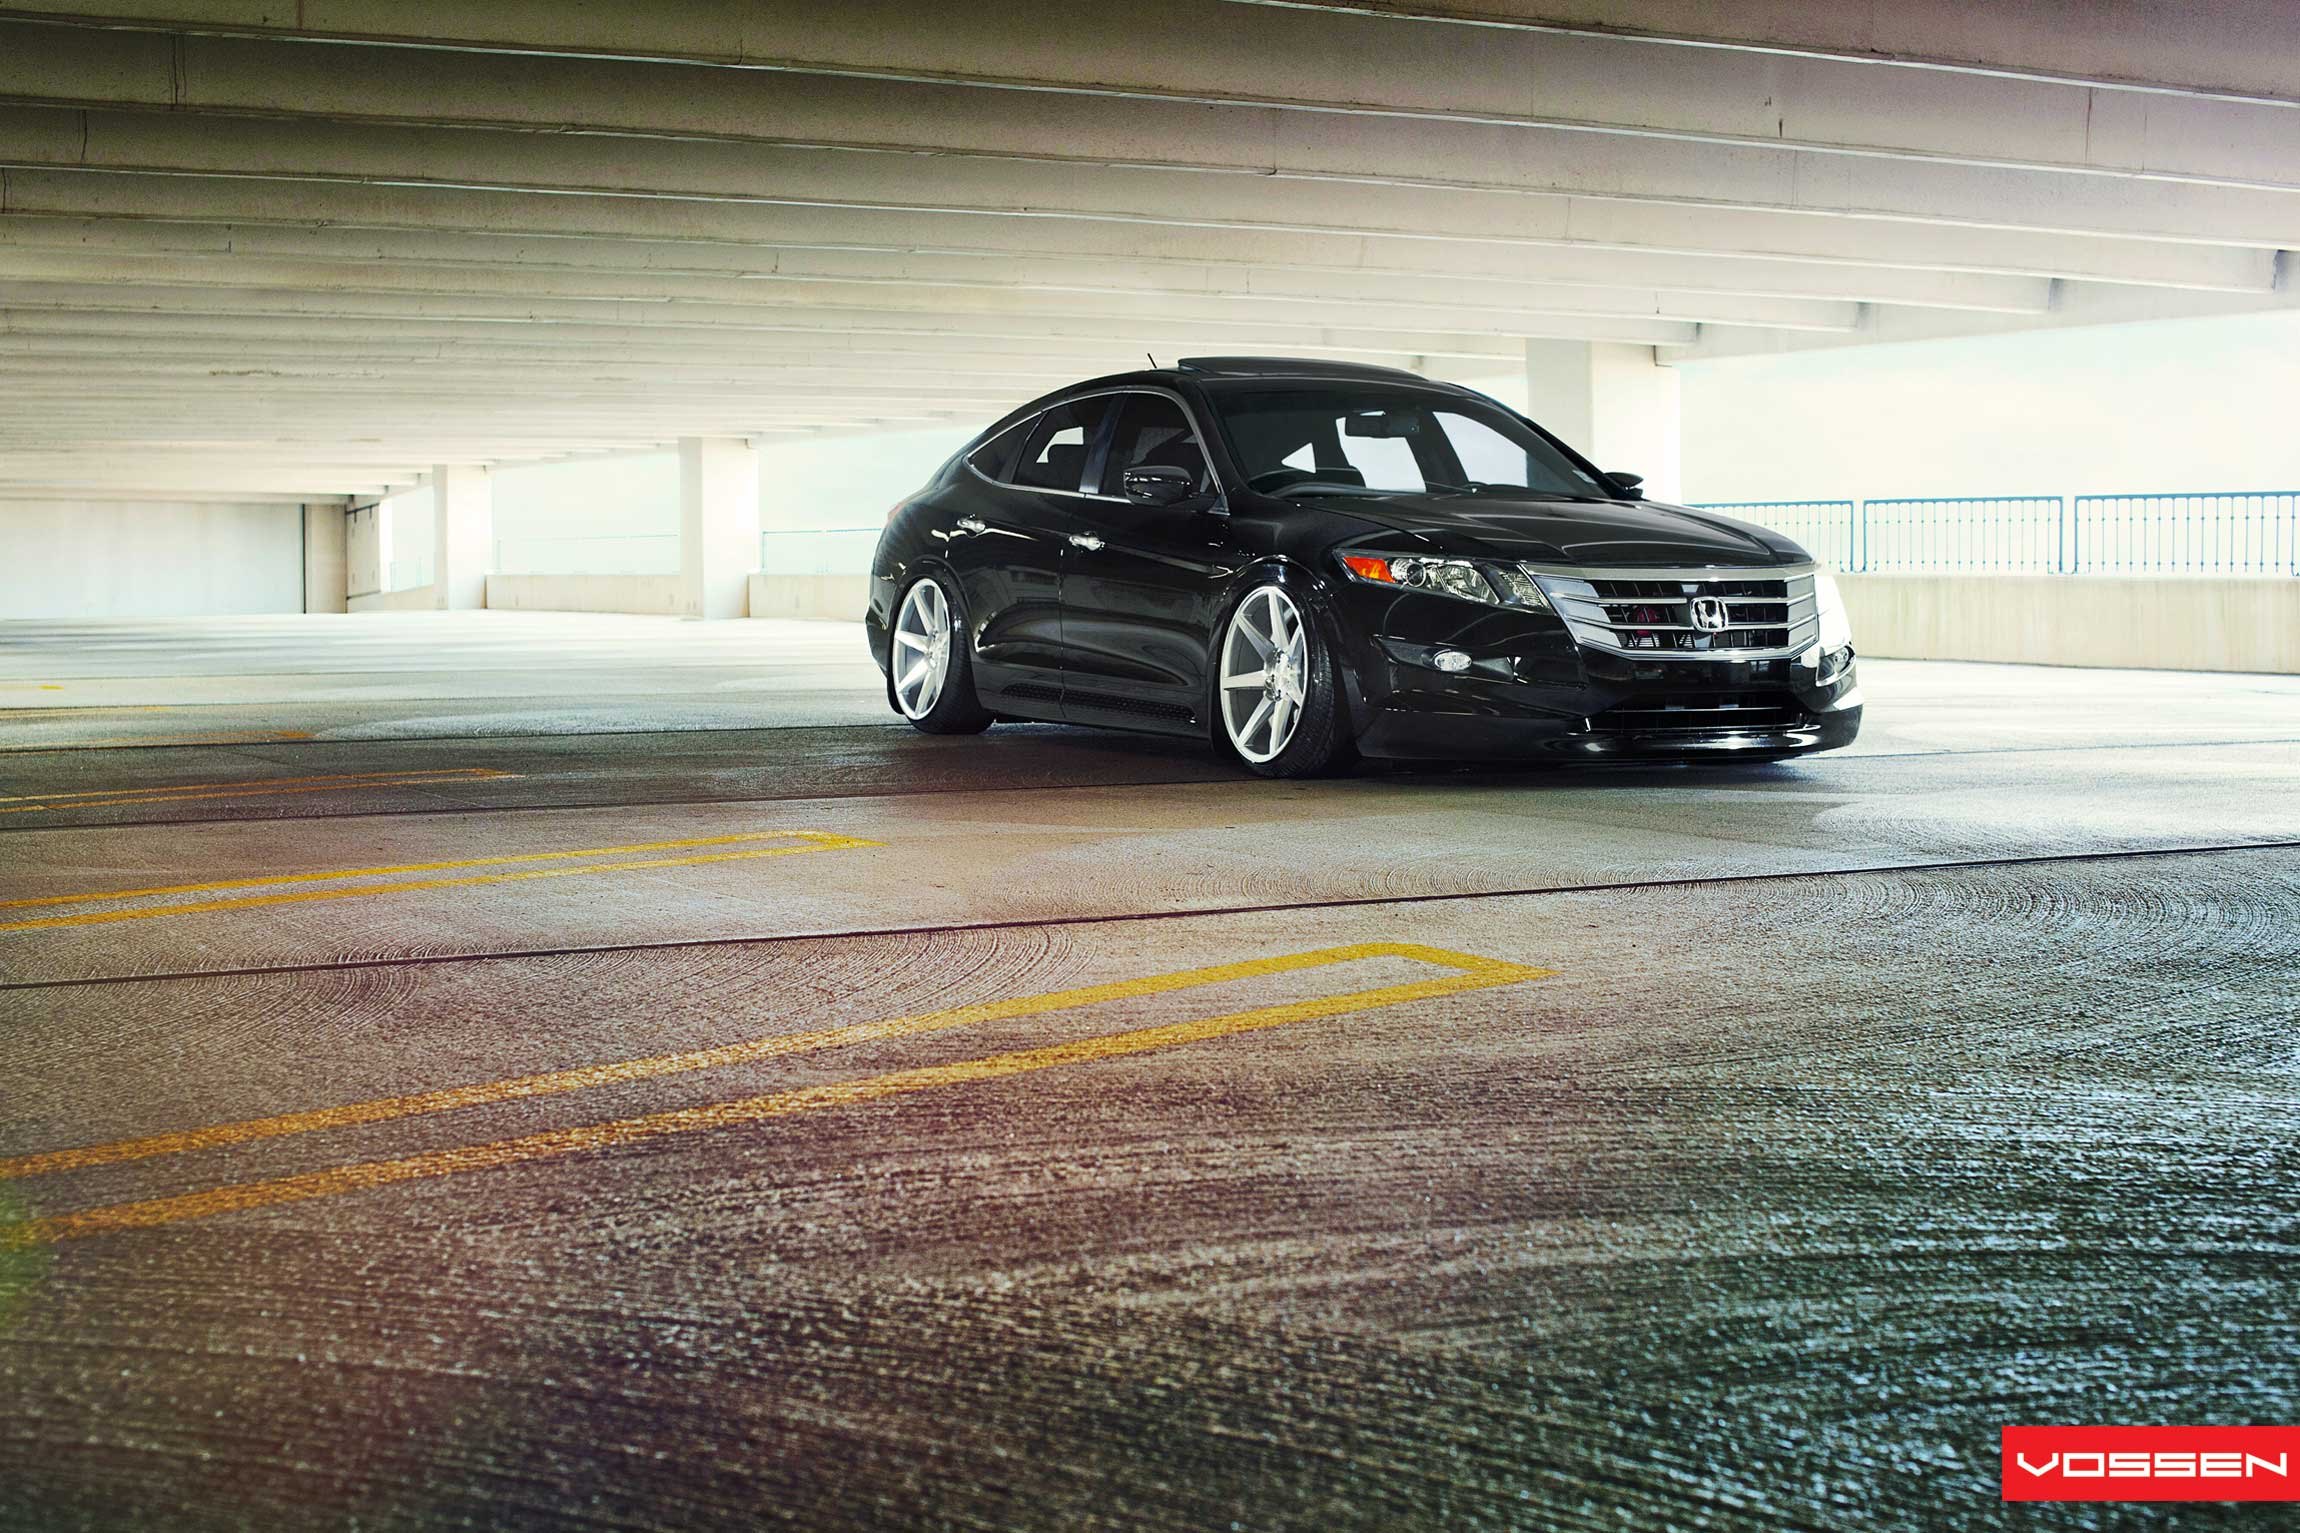 Black Honda Crosstour with Chrome Grille - Photo by Vossen